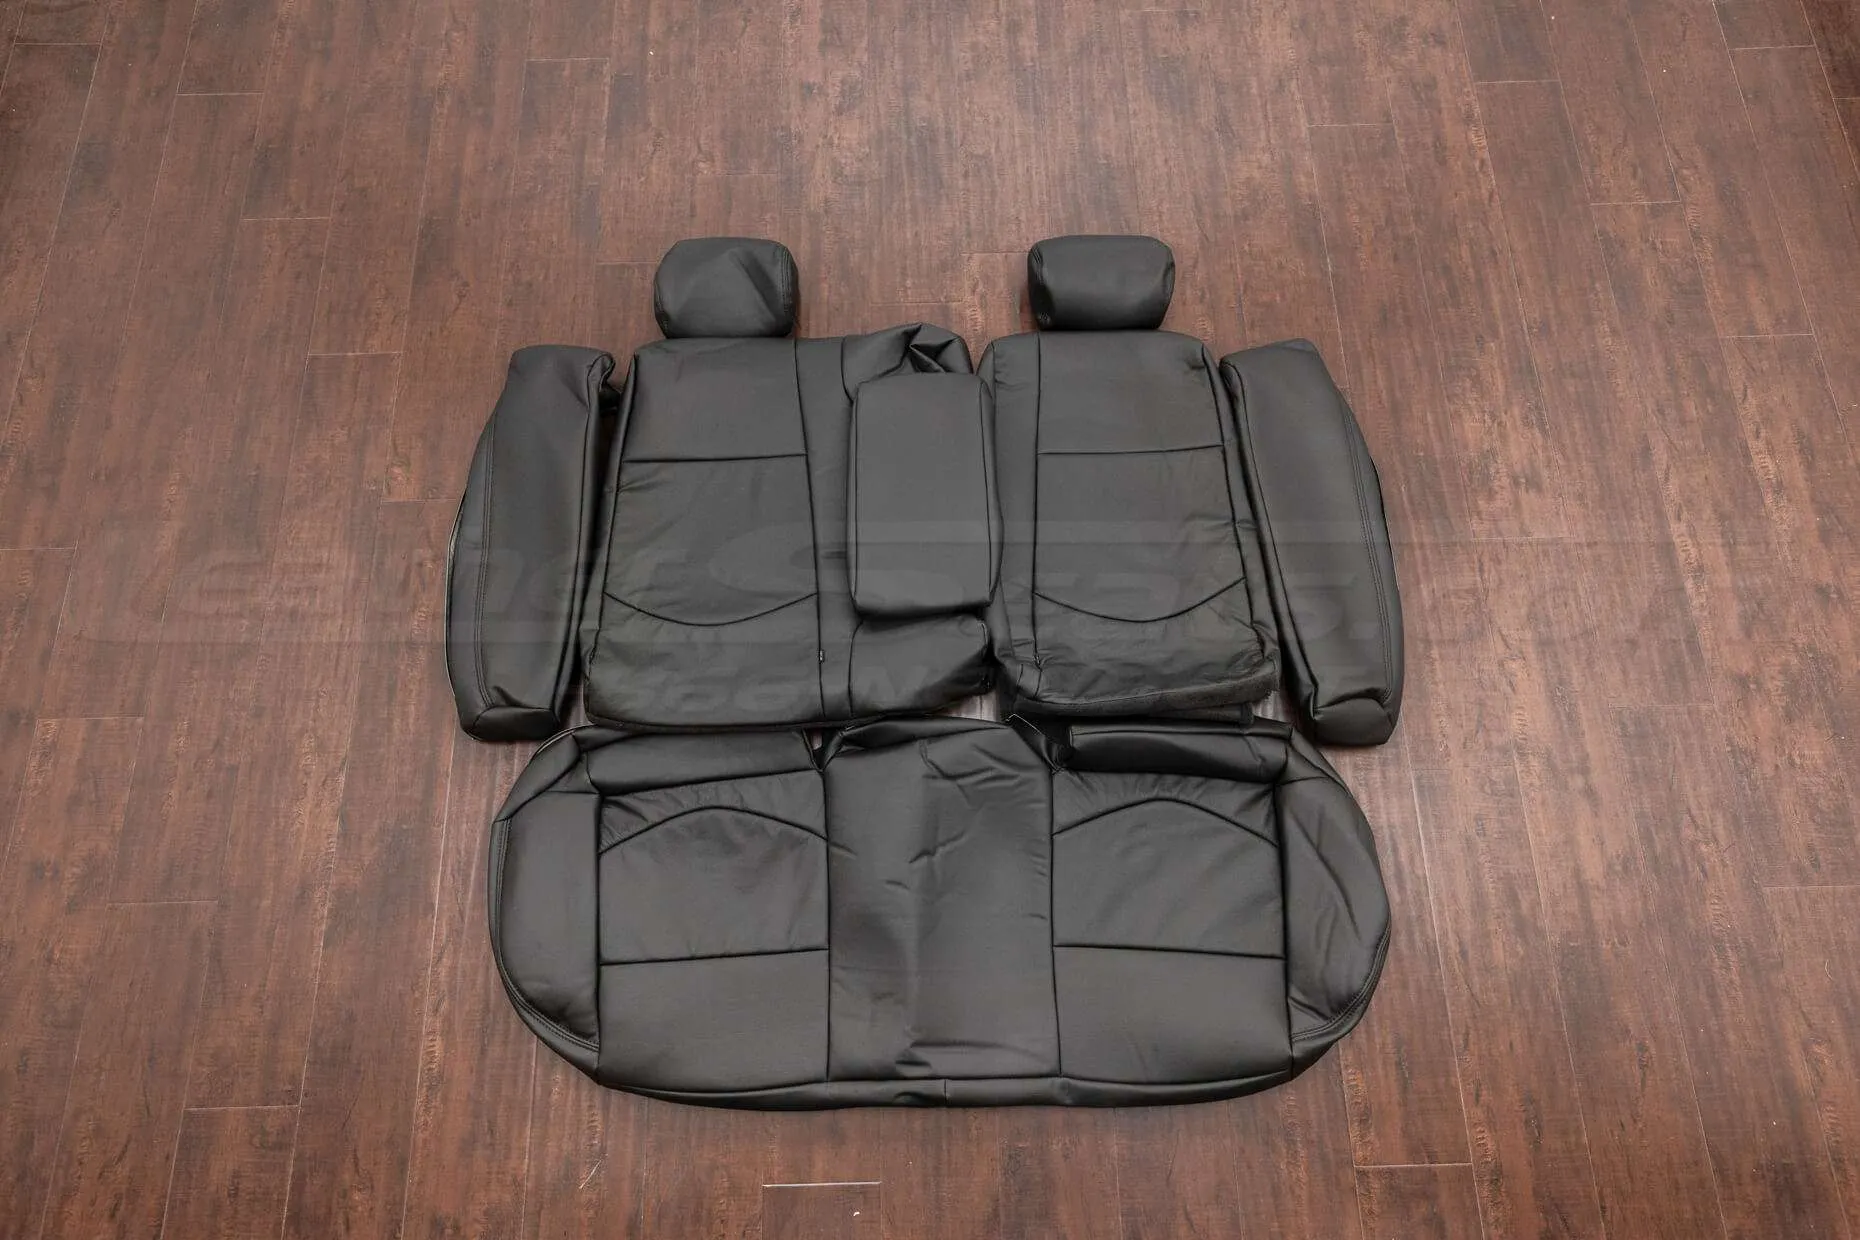 2010-2013 Kia Forte Upholstery Kit- Black - Rear seat upholstery with bolsters and armrest